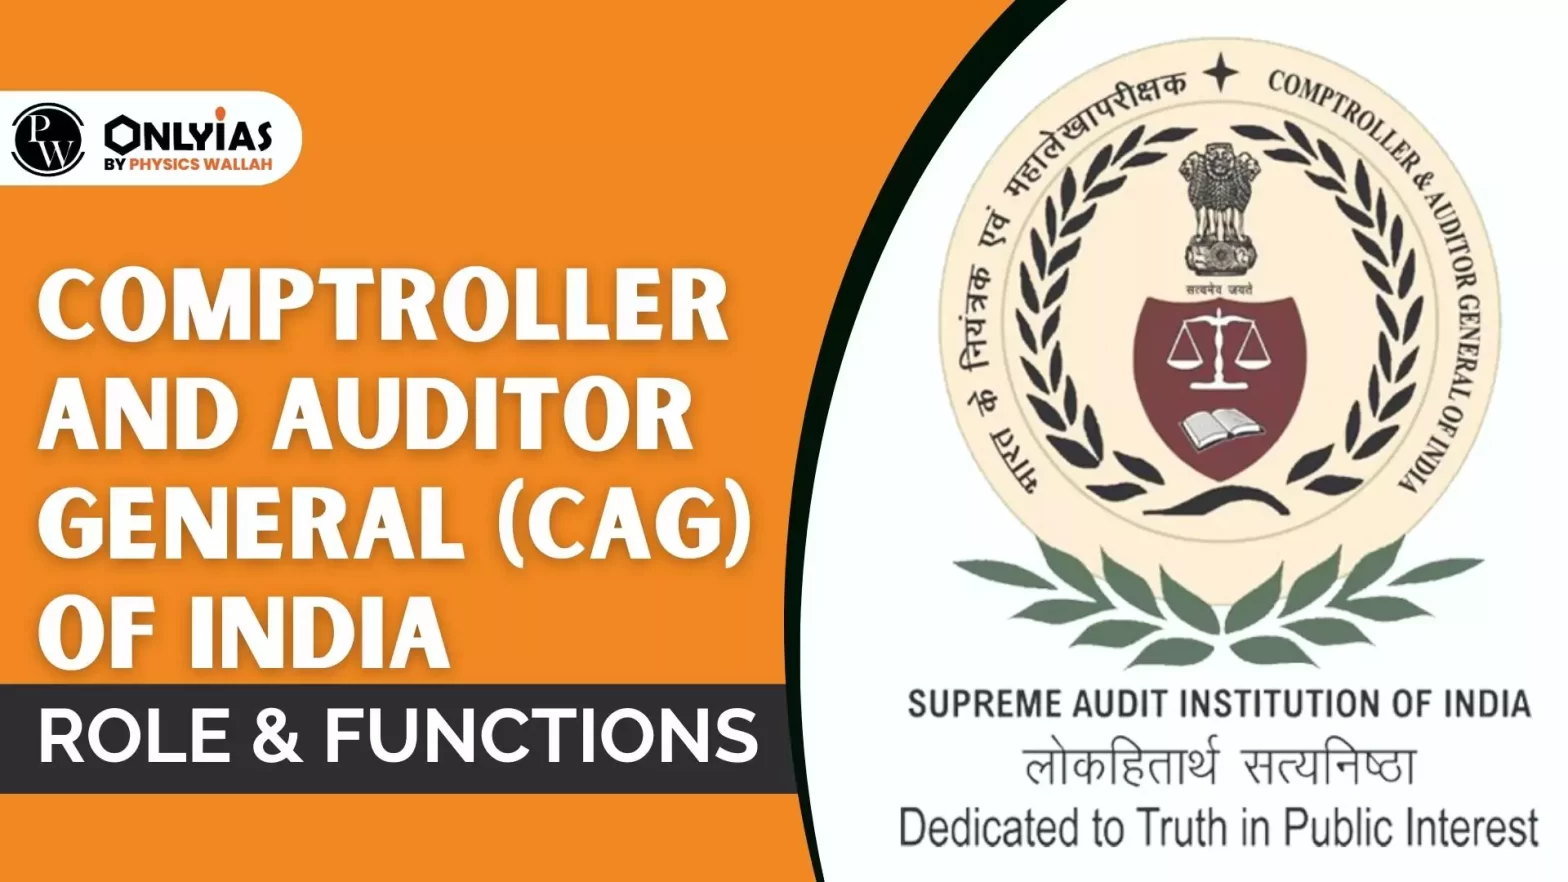 Comptroller and Auditor General (CAG) of India – Role & Functions